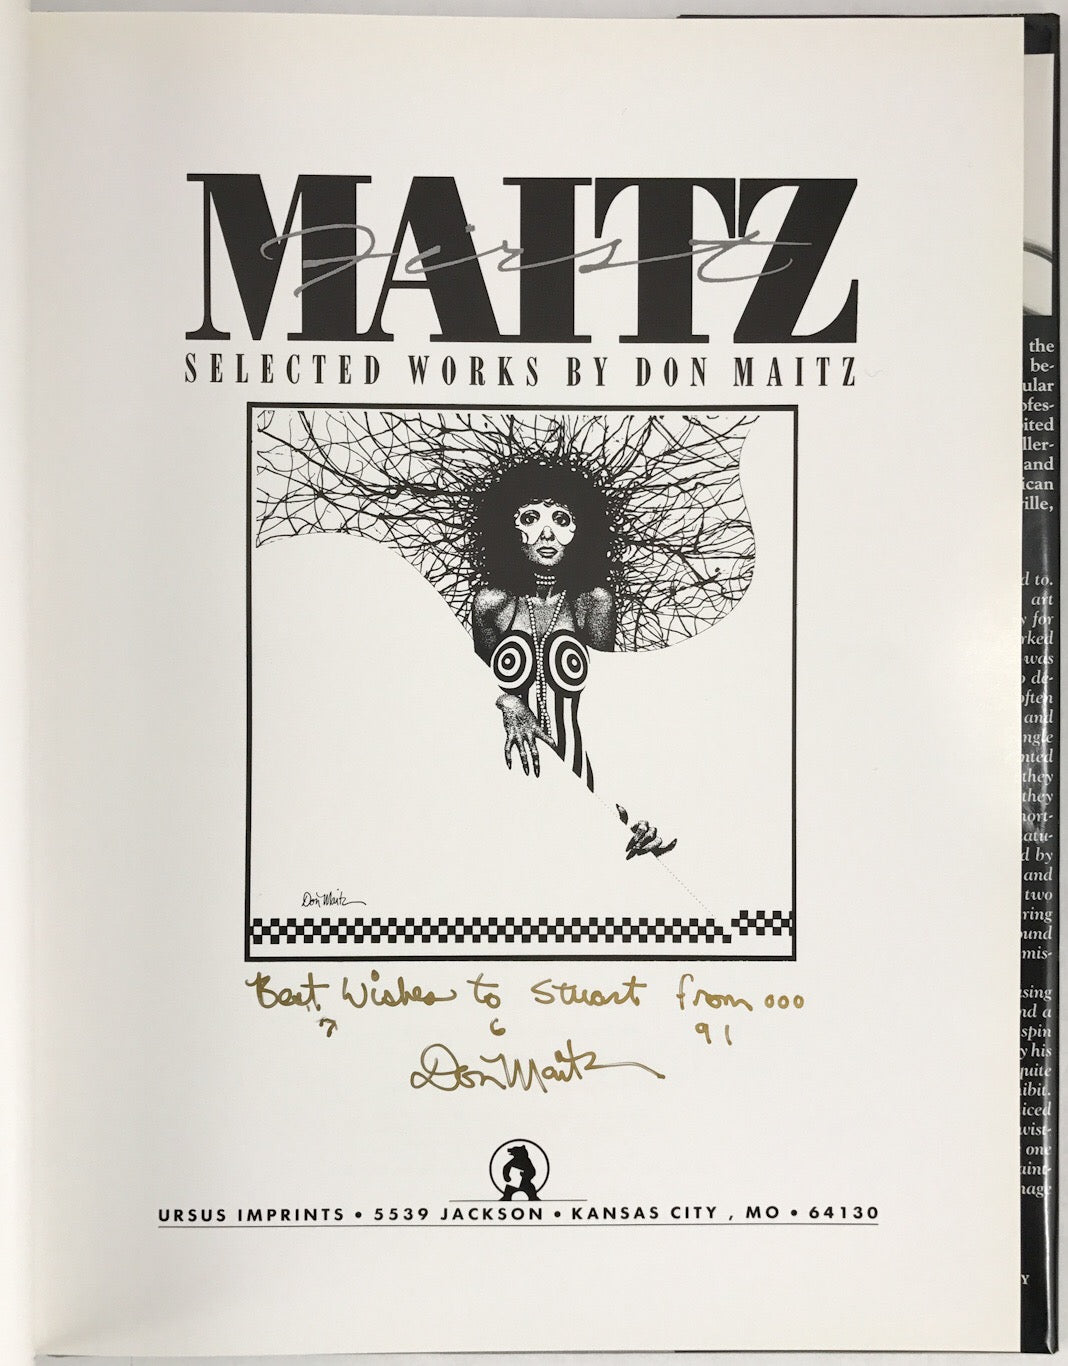 First Maitz: Selected Works by Don Maitz - Signed 1st